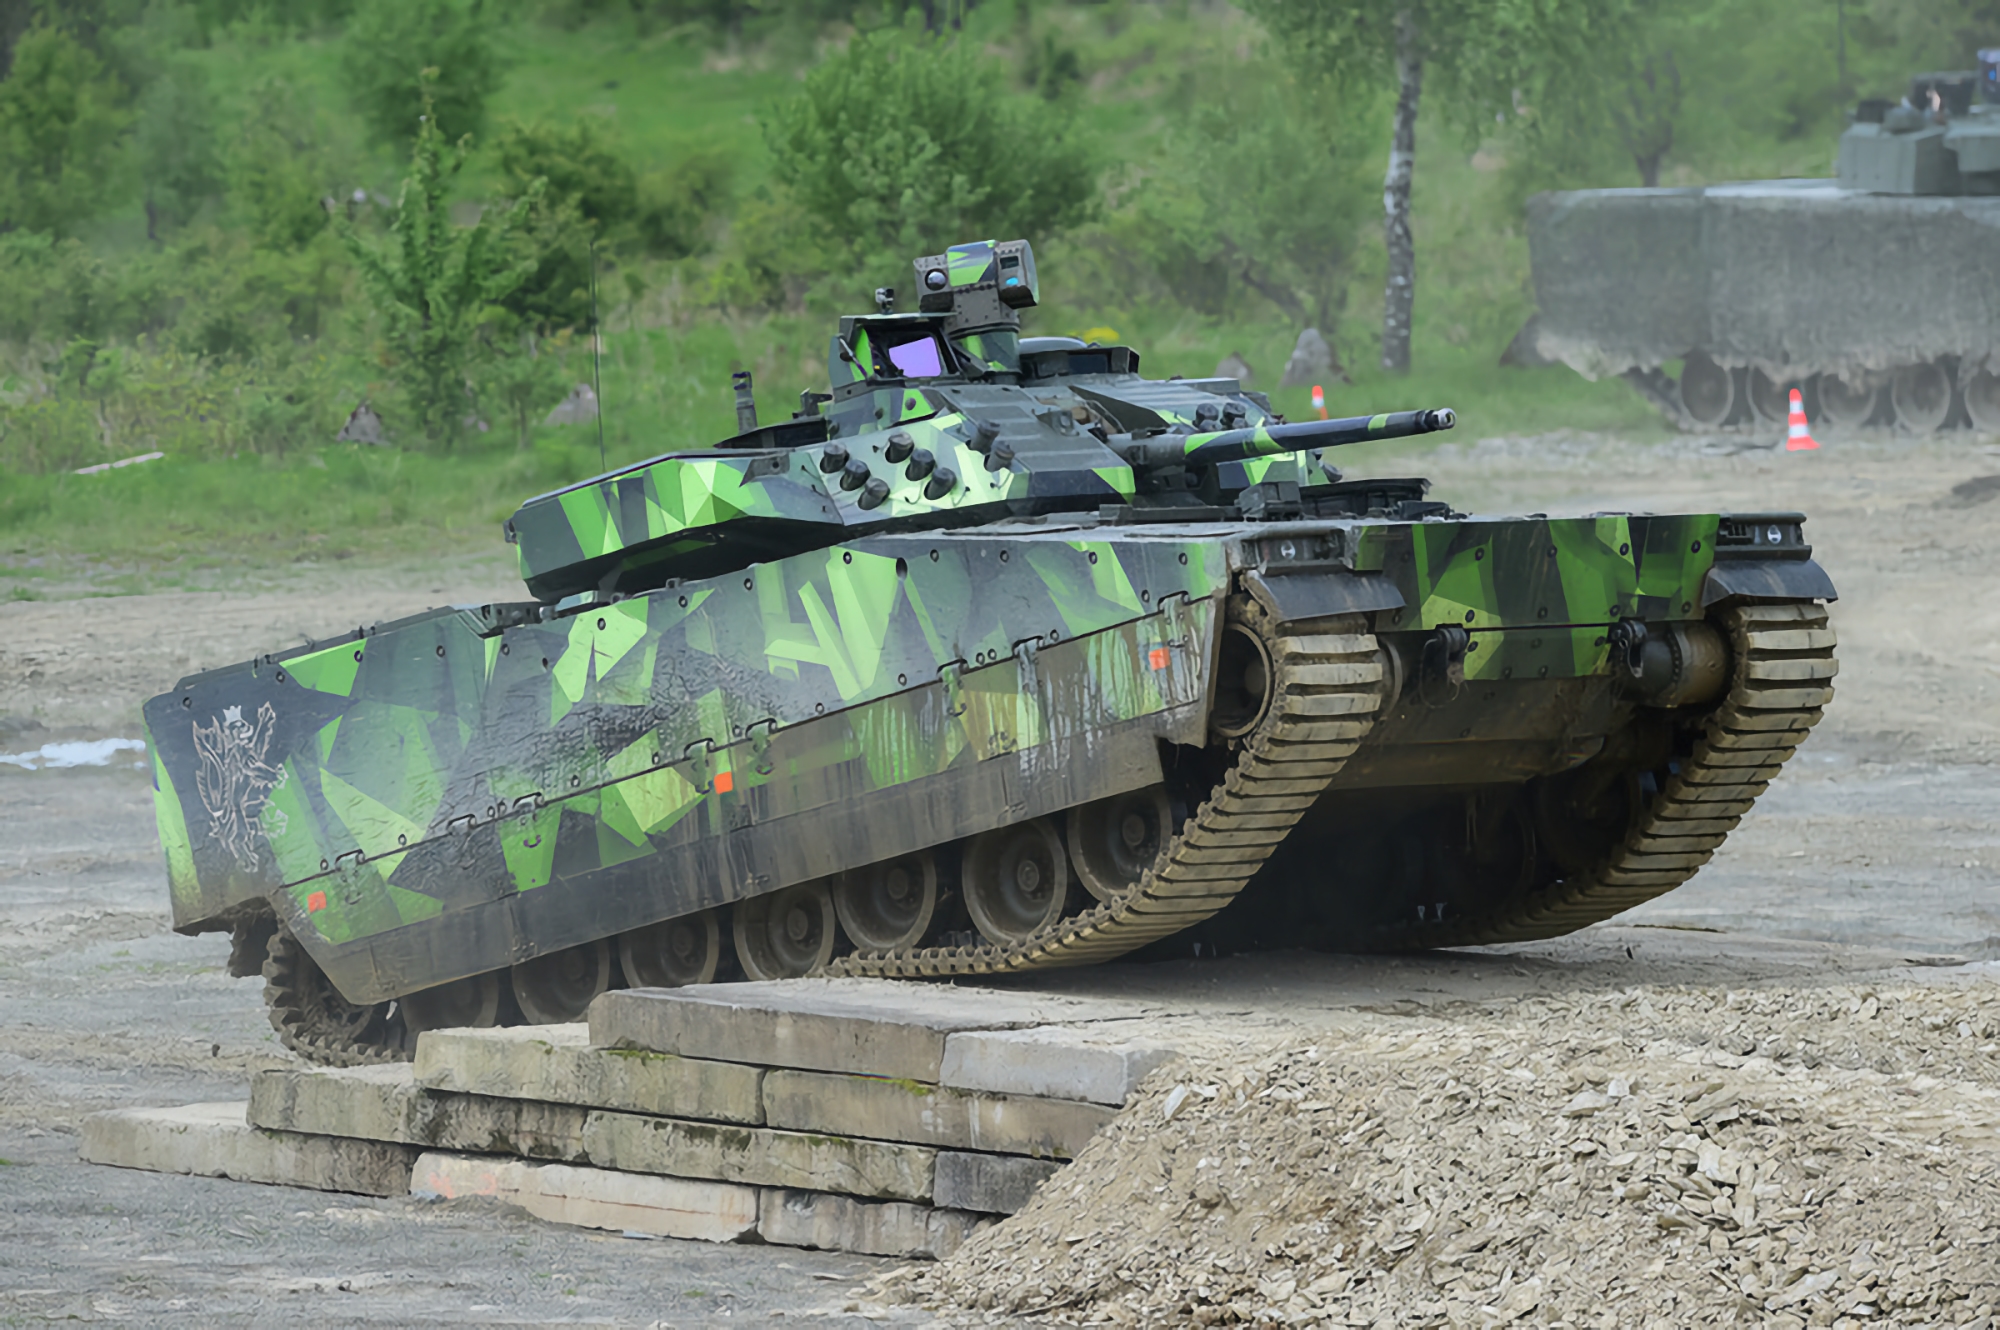 €1,700,000,000 contract: Slovakia buys 125 CV90 MkIV BMPs with 35mm guns from Sweden